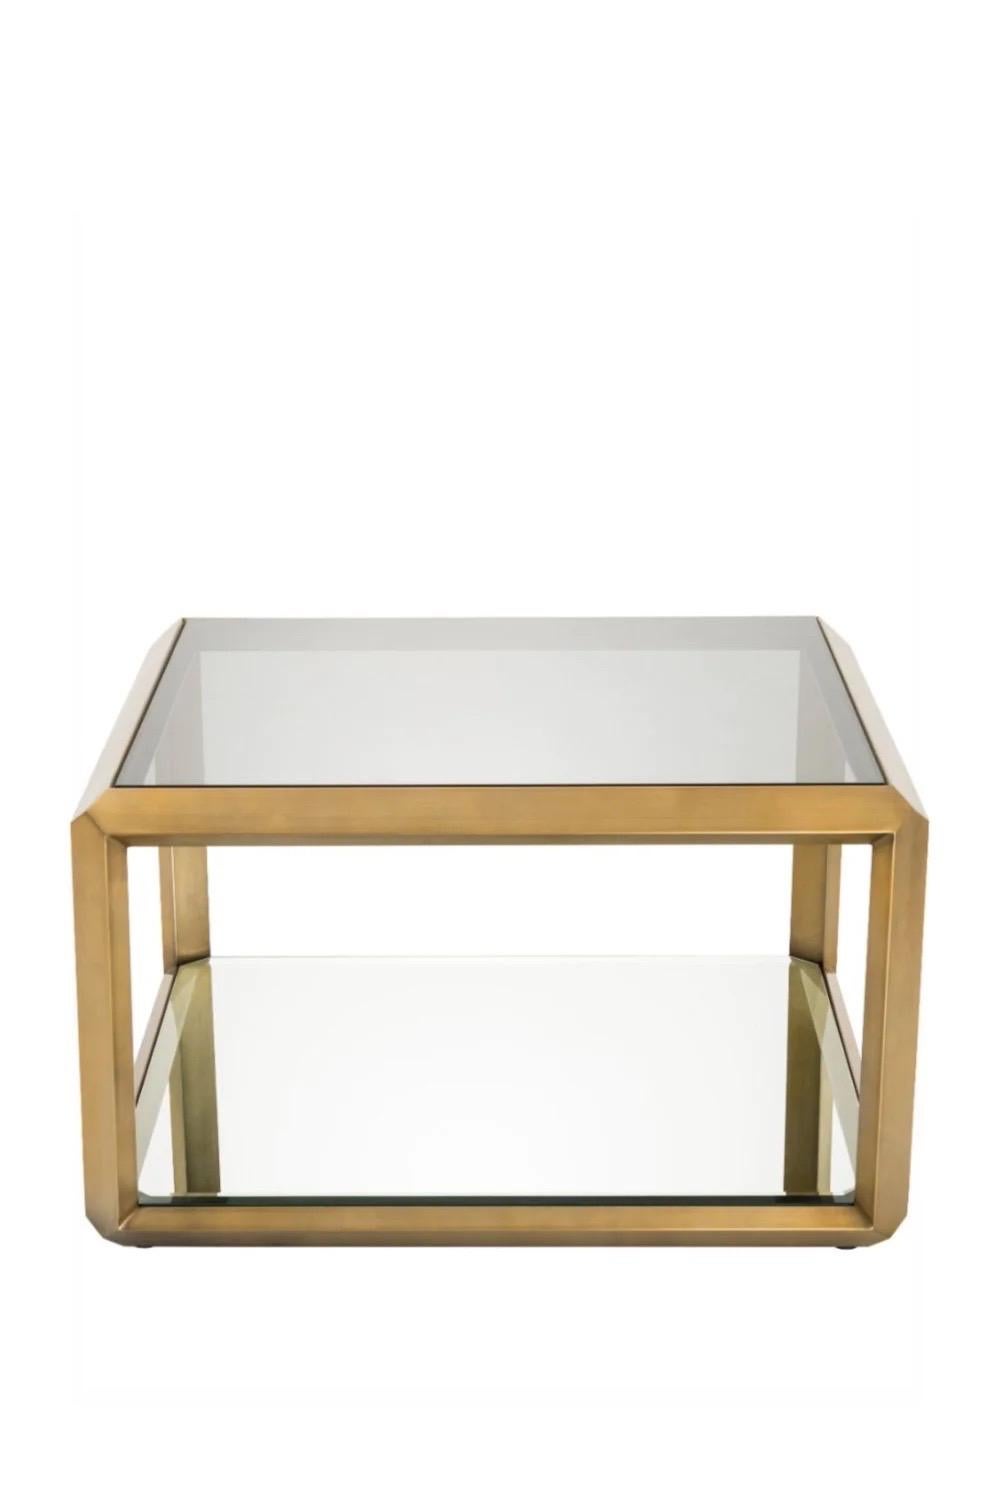 Mid-Century Modern Eichholtz Callum Brushed Brass and Smoked Glass Square Side Table, a Pair For Sale